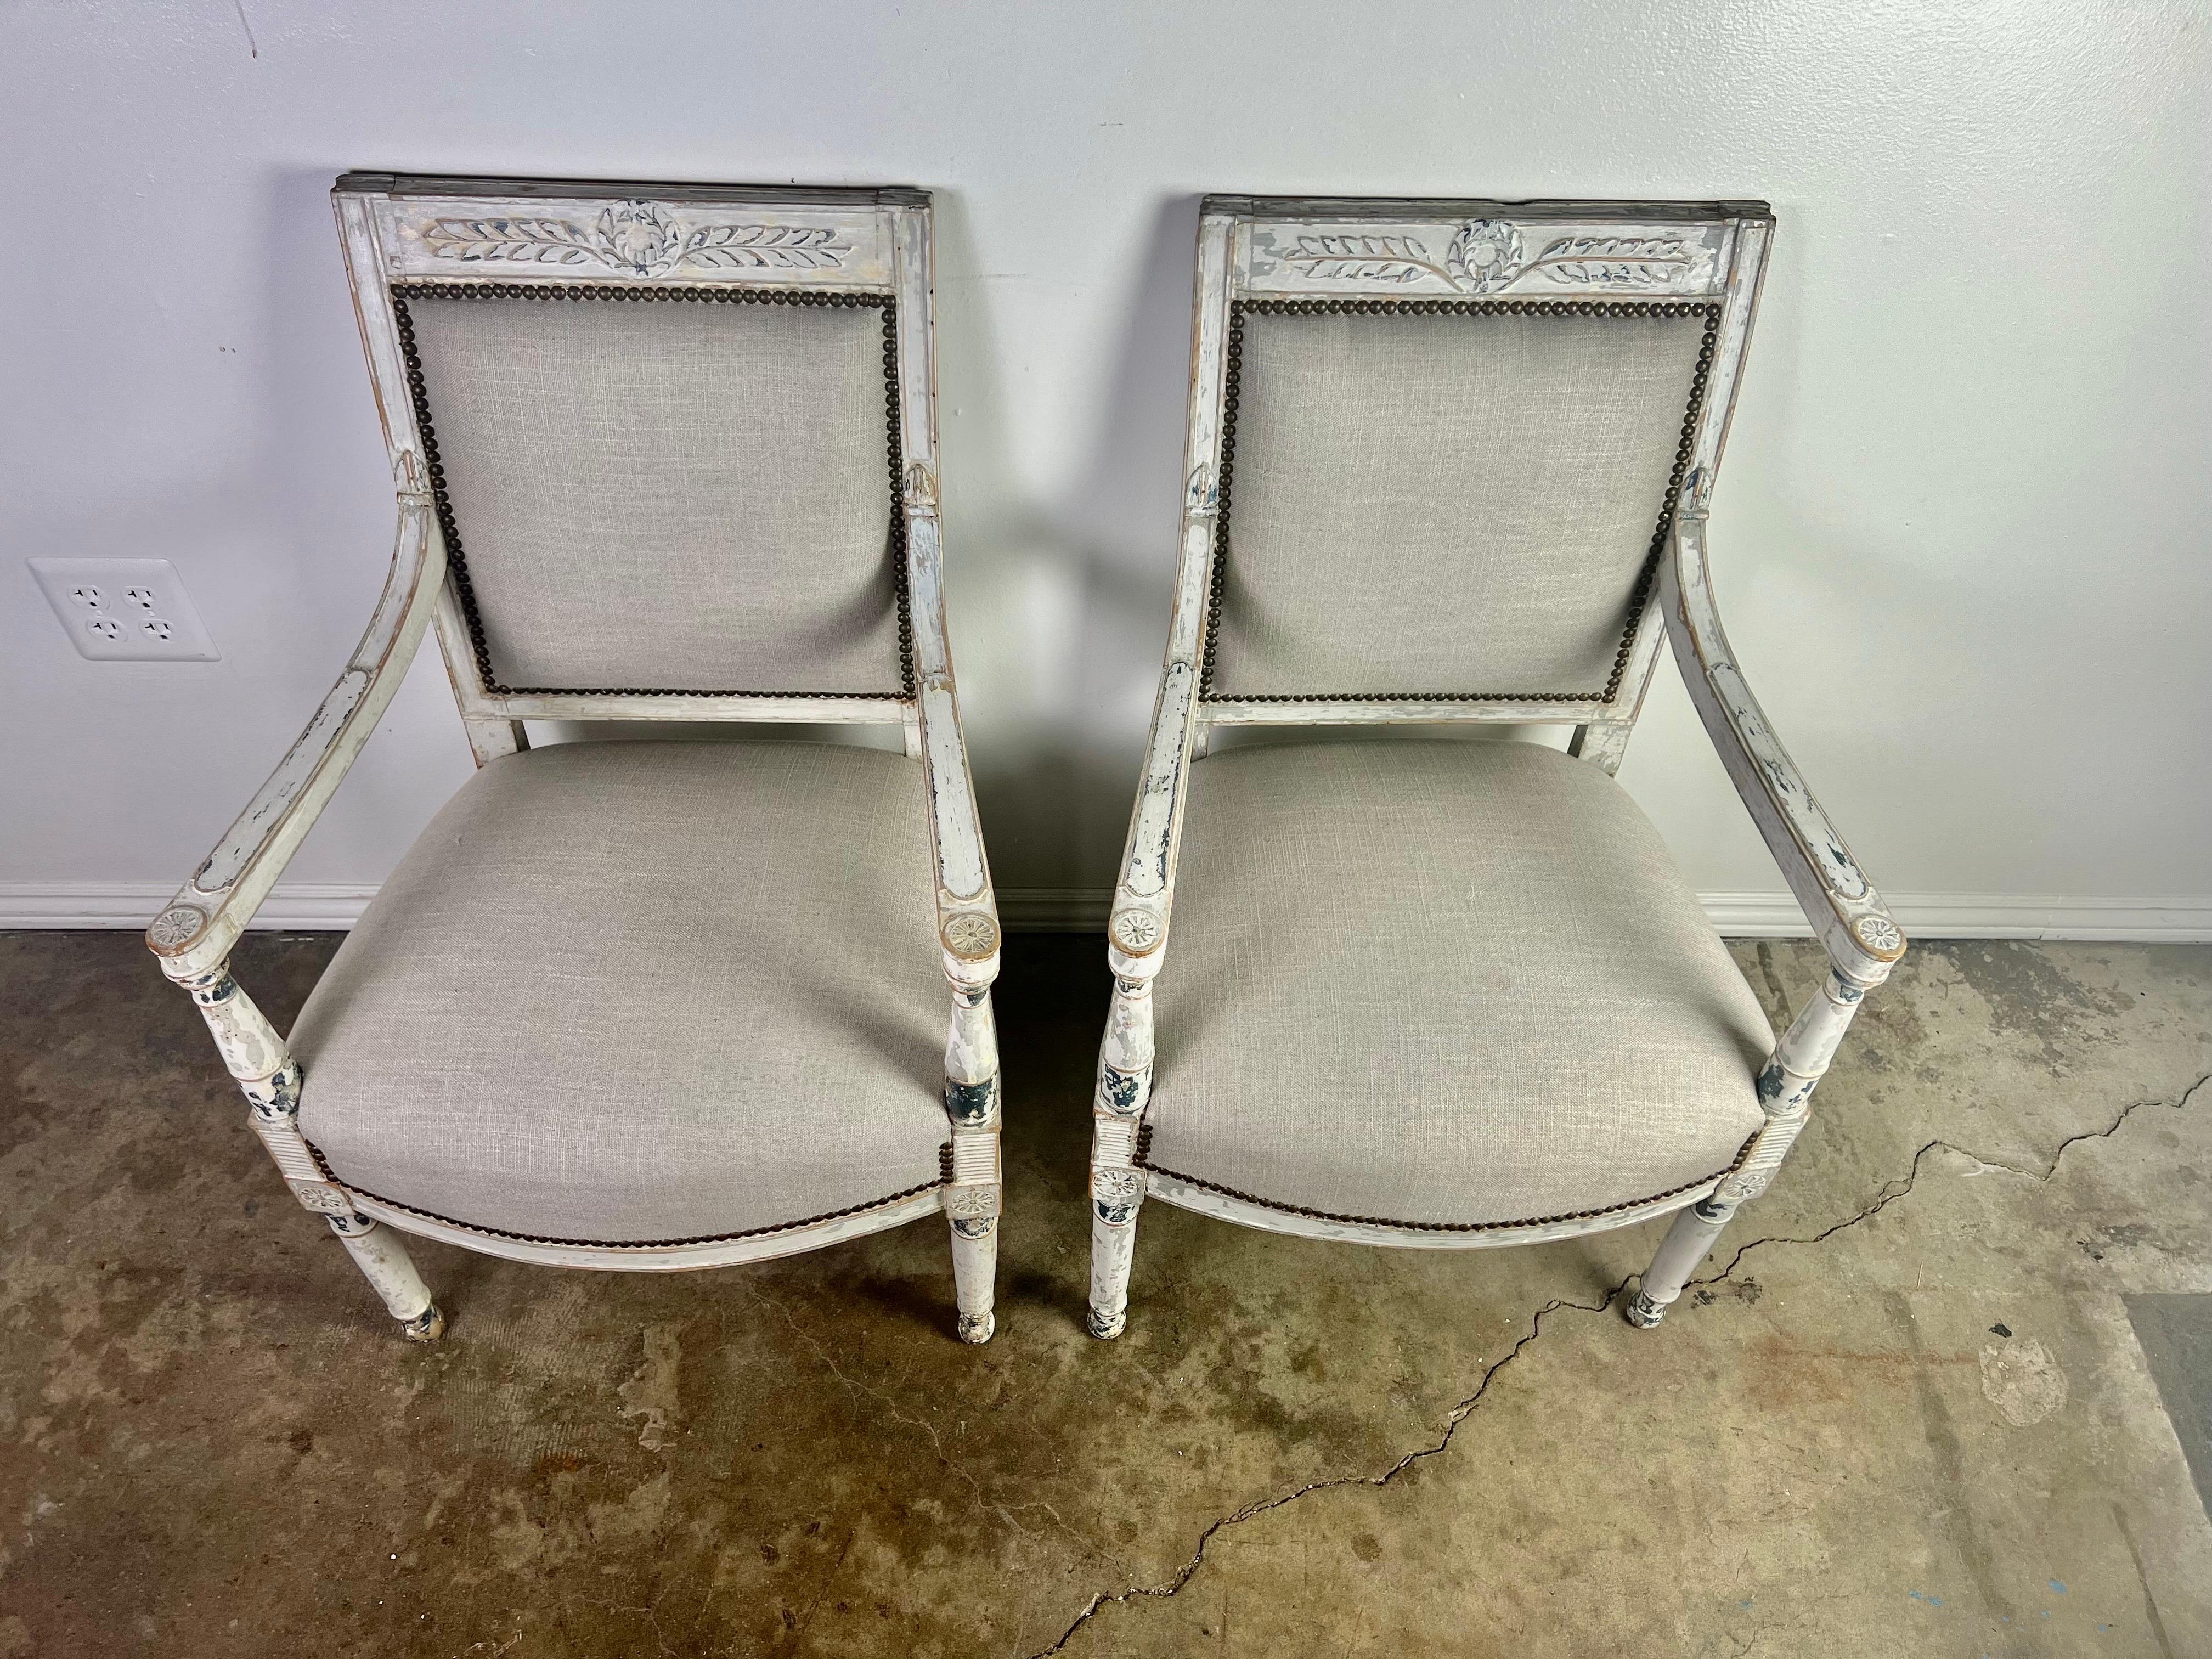 Pair of 19th century Swedish style painted armchairs. The chairs stand on four straight fluted legs. There is a carved laurel leaf design at the top of the chairs. The chairs are newly upholstered in a gray linen with nailhead trim detail. The